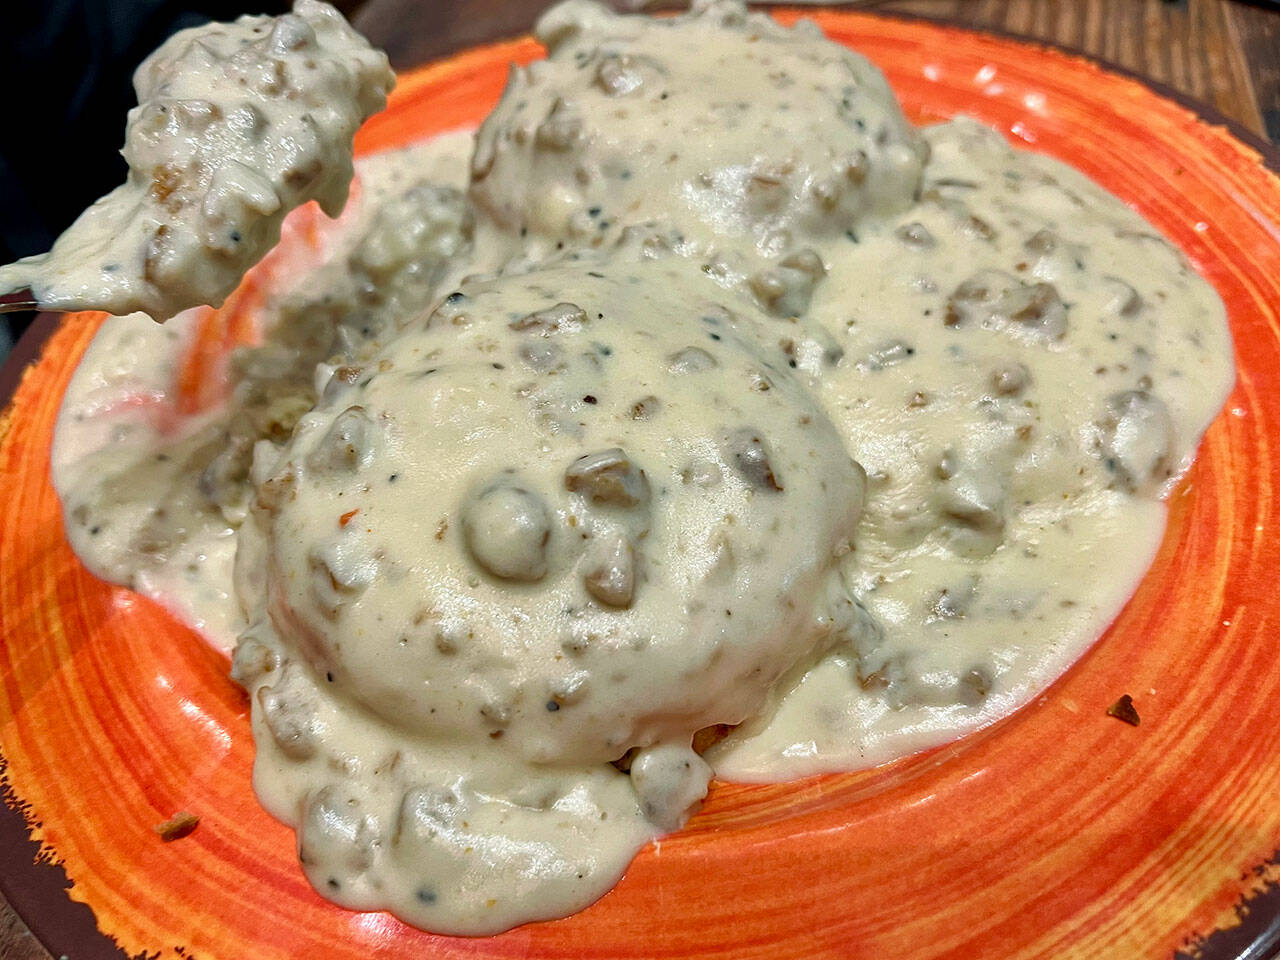 Biscuits and Gravy, $8, at Quil Ceda Creek Casino in Tulalip, where breakfast with numerous menu choices is served 24/7. (Andrea Brown / The Herald)